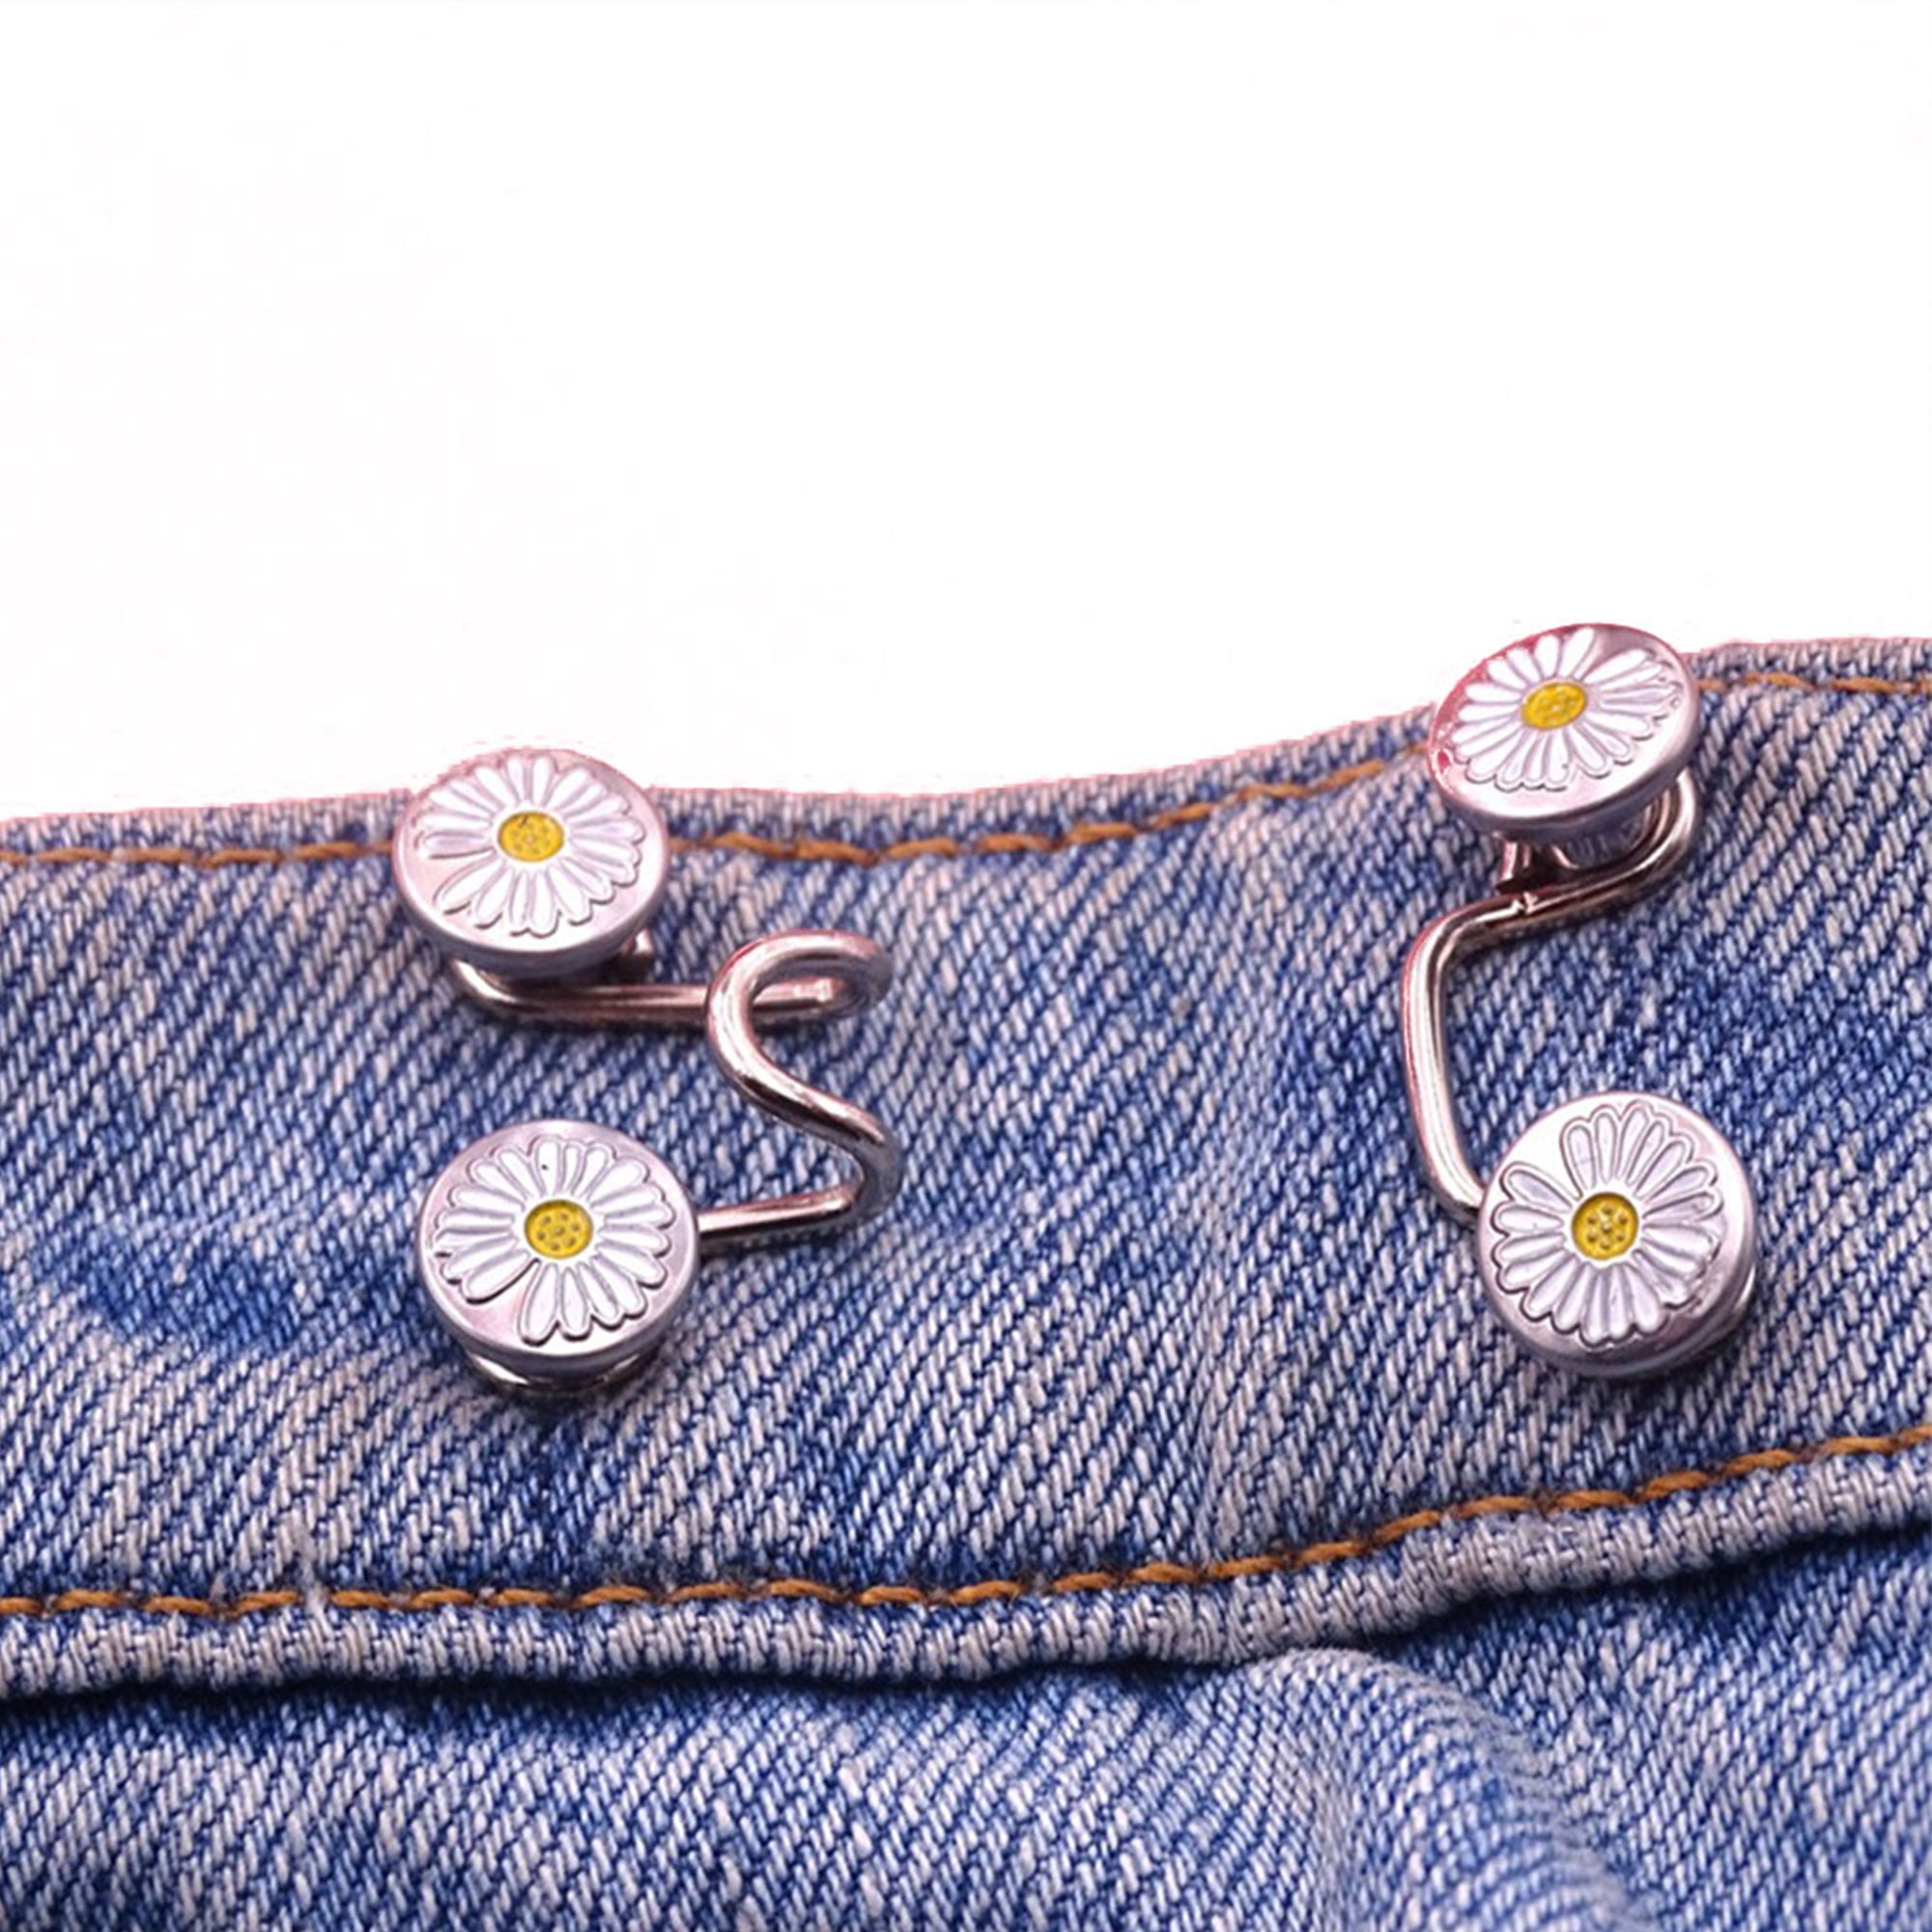 Wanyng Jean Buttons Pant Waist Tightener Instant Jean Buttons for Loose Jeans Pants Clips for Waist Detachable Jean Buttons Pins No Sewing Waistband